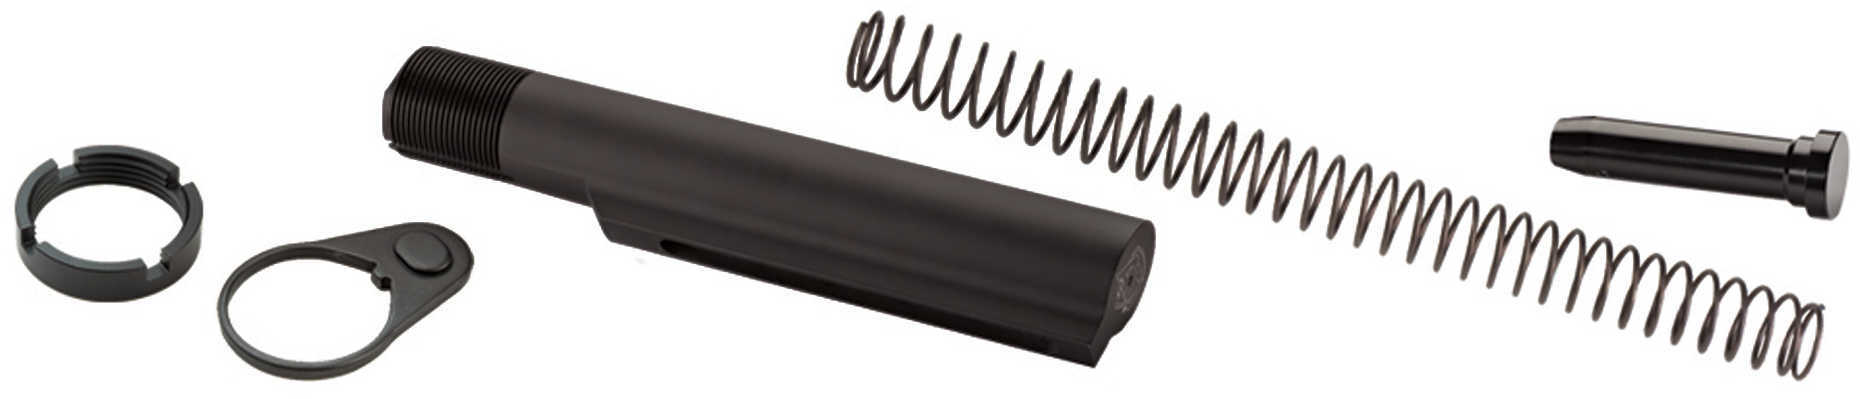 AR-15 Military Mil-Spec Buffer Tube Assembly Package